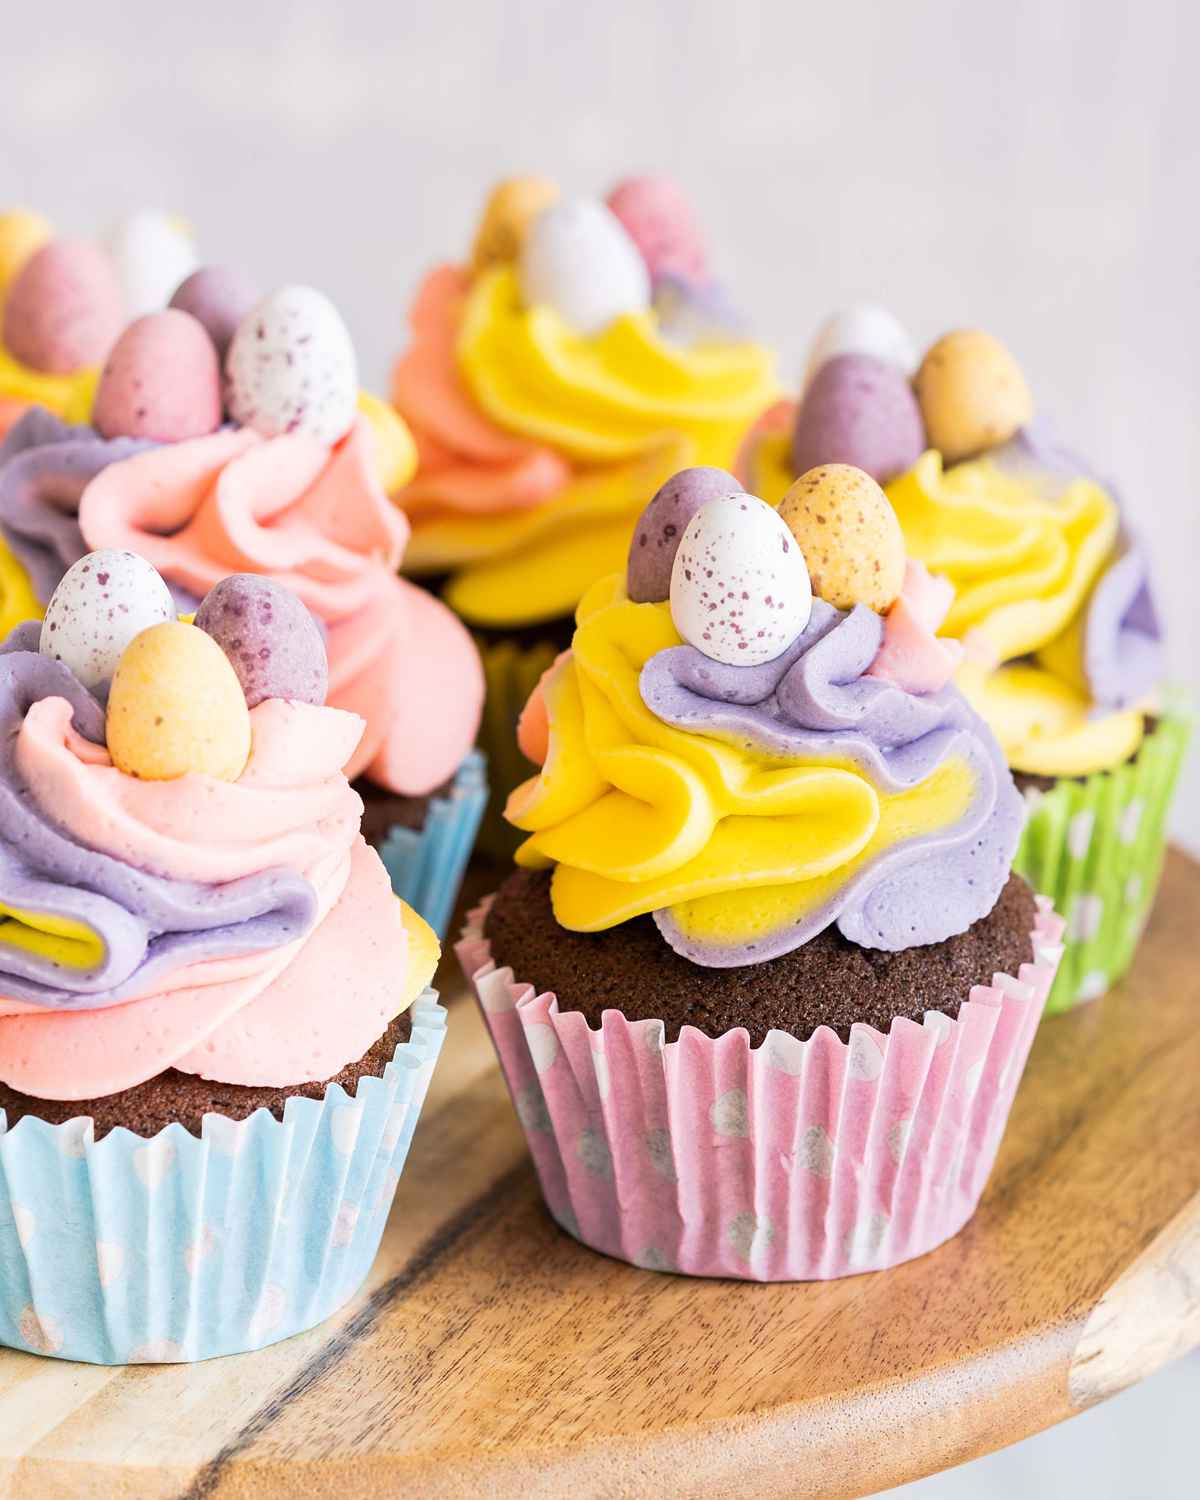 With perfect springtime colours, these mini egg cupcakes are too good to resist!